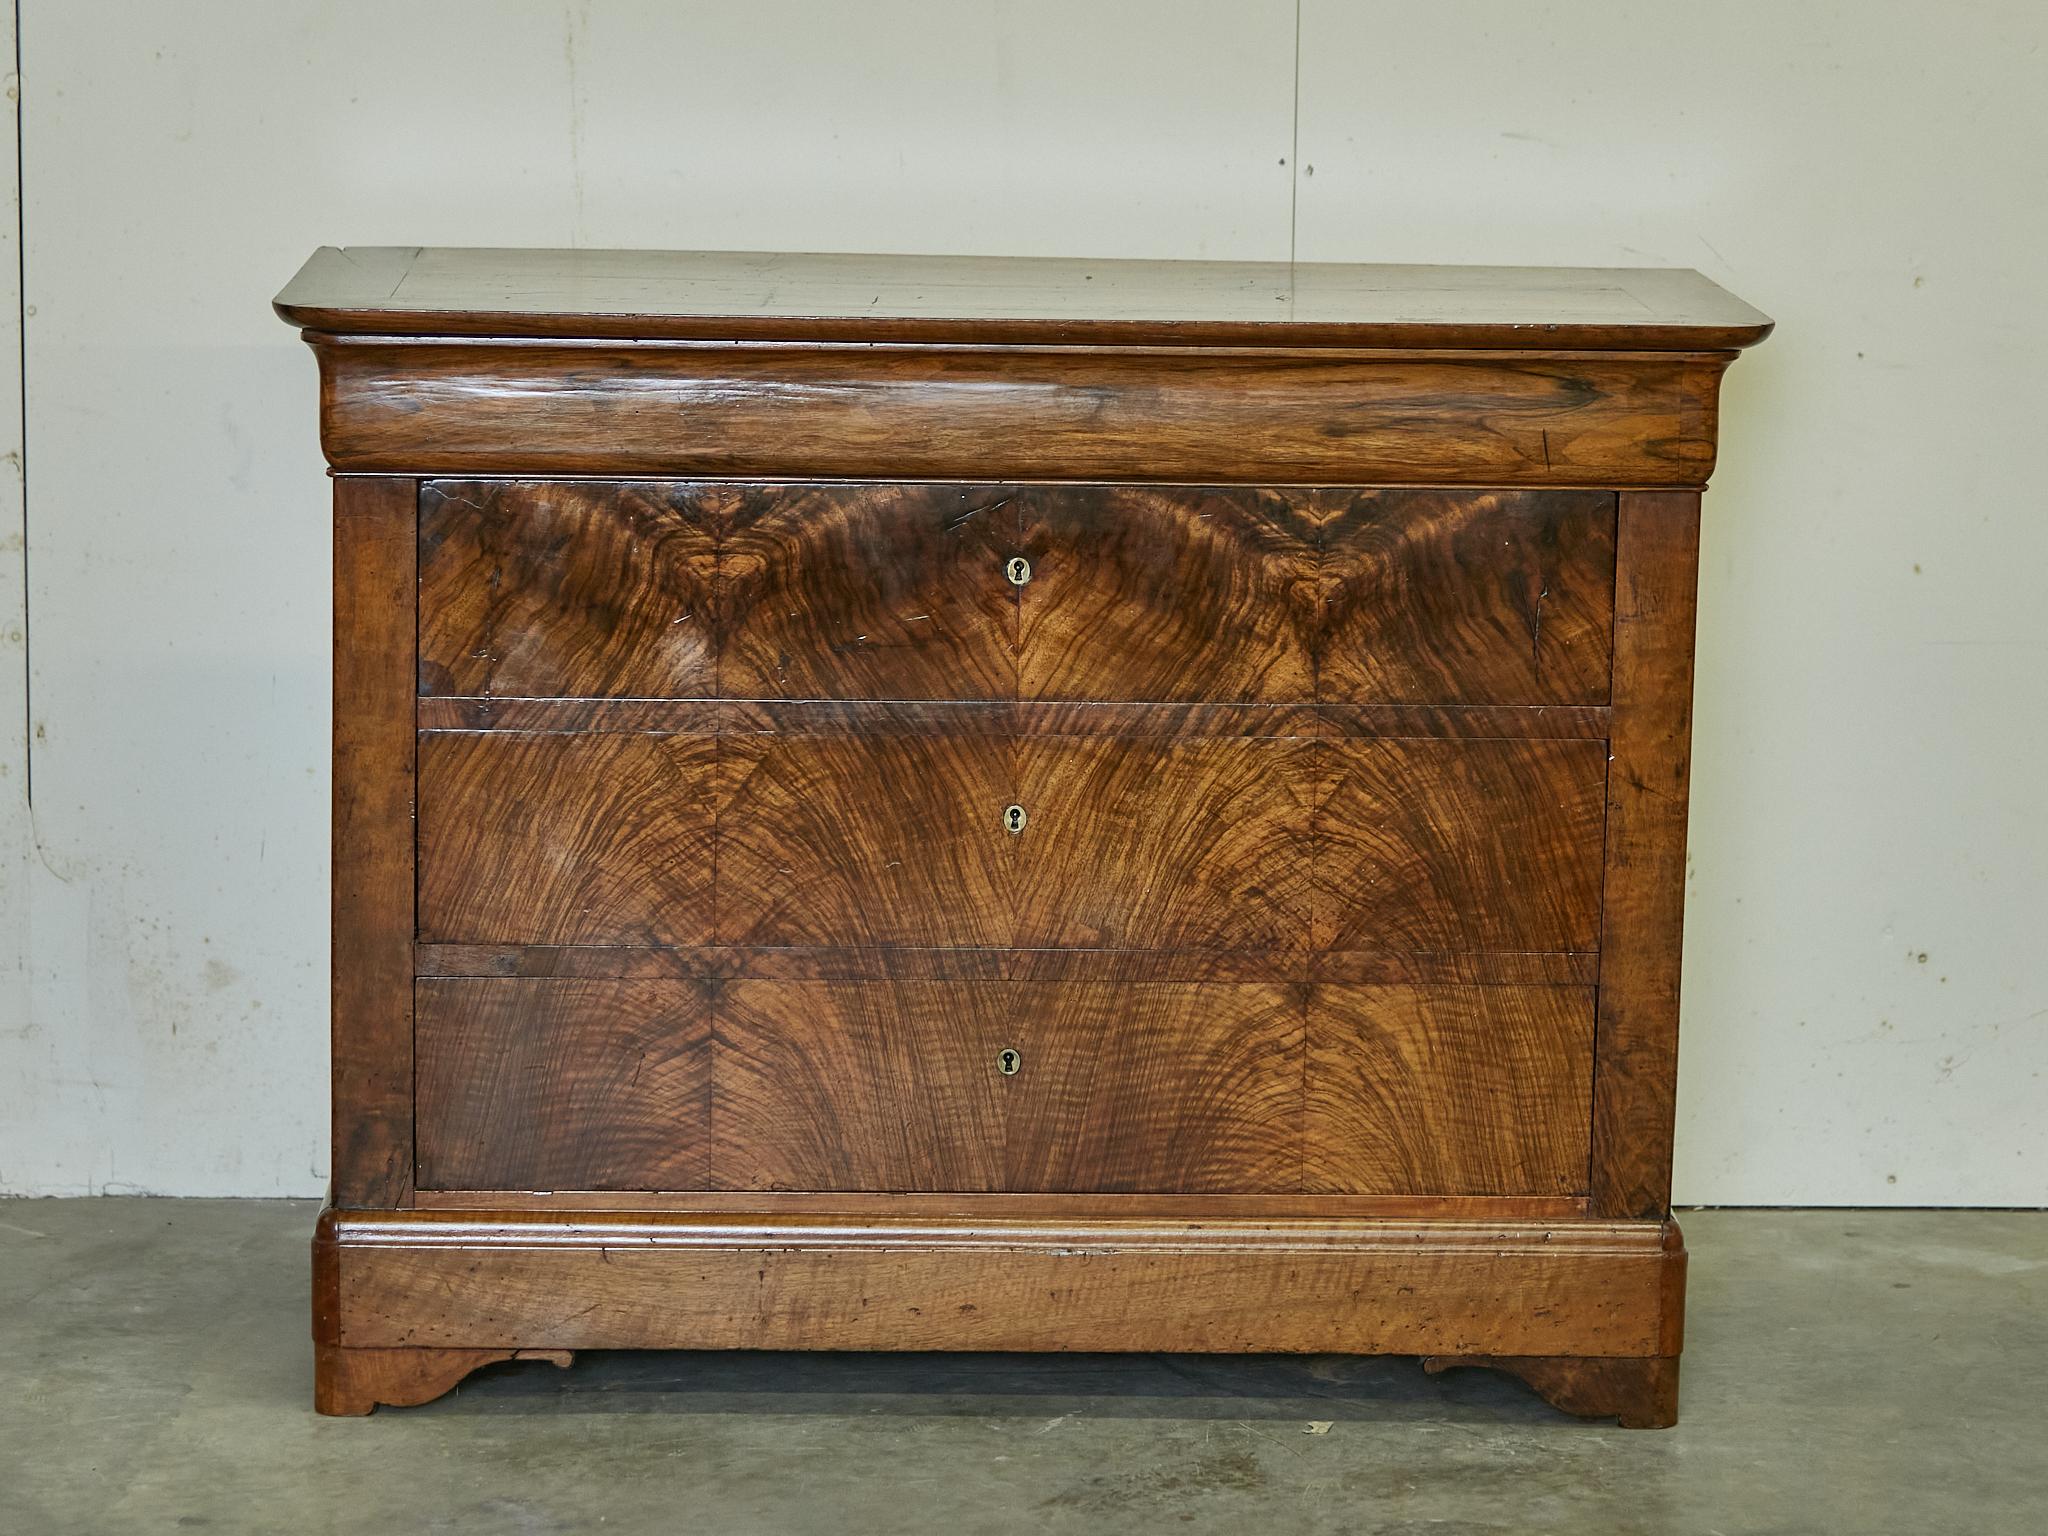 A French Louis-Philippe walnut four-drawer commode from the 19th century with bookmatched façade and bracket feet. Step into the realm of classic French elegance with this French Louis-Philippe walnut four-drawer commode from the 19th century, a